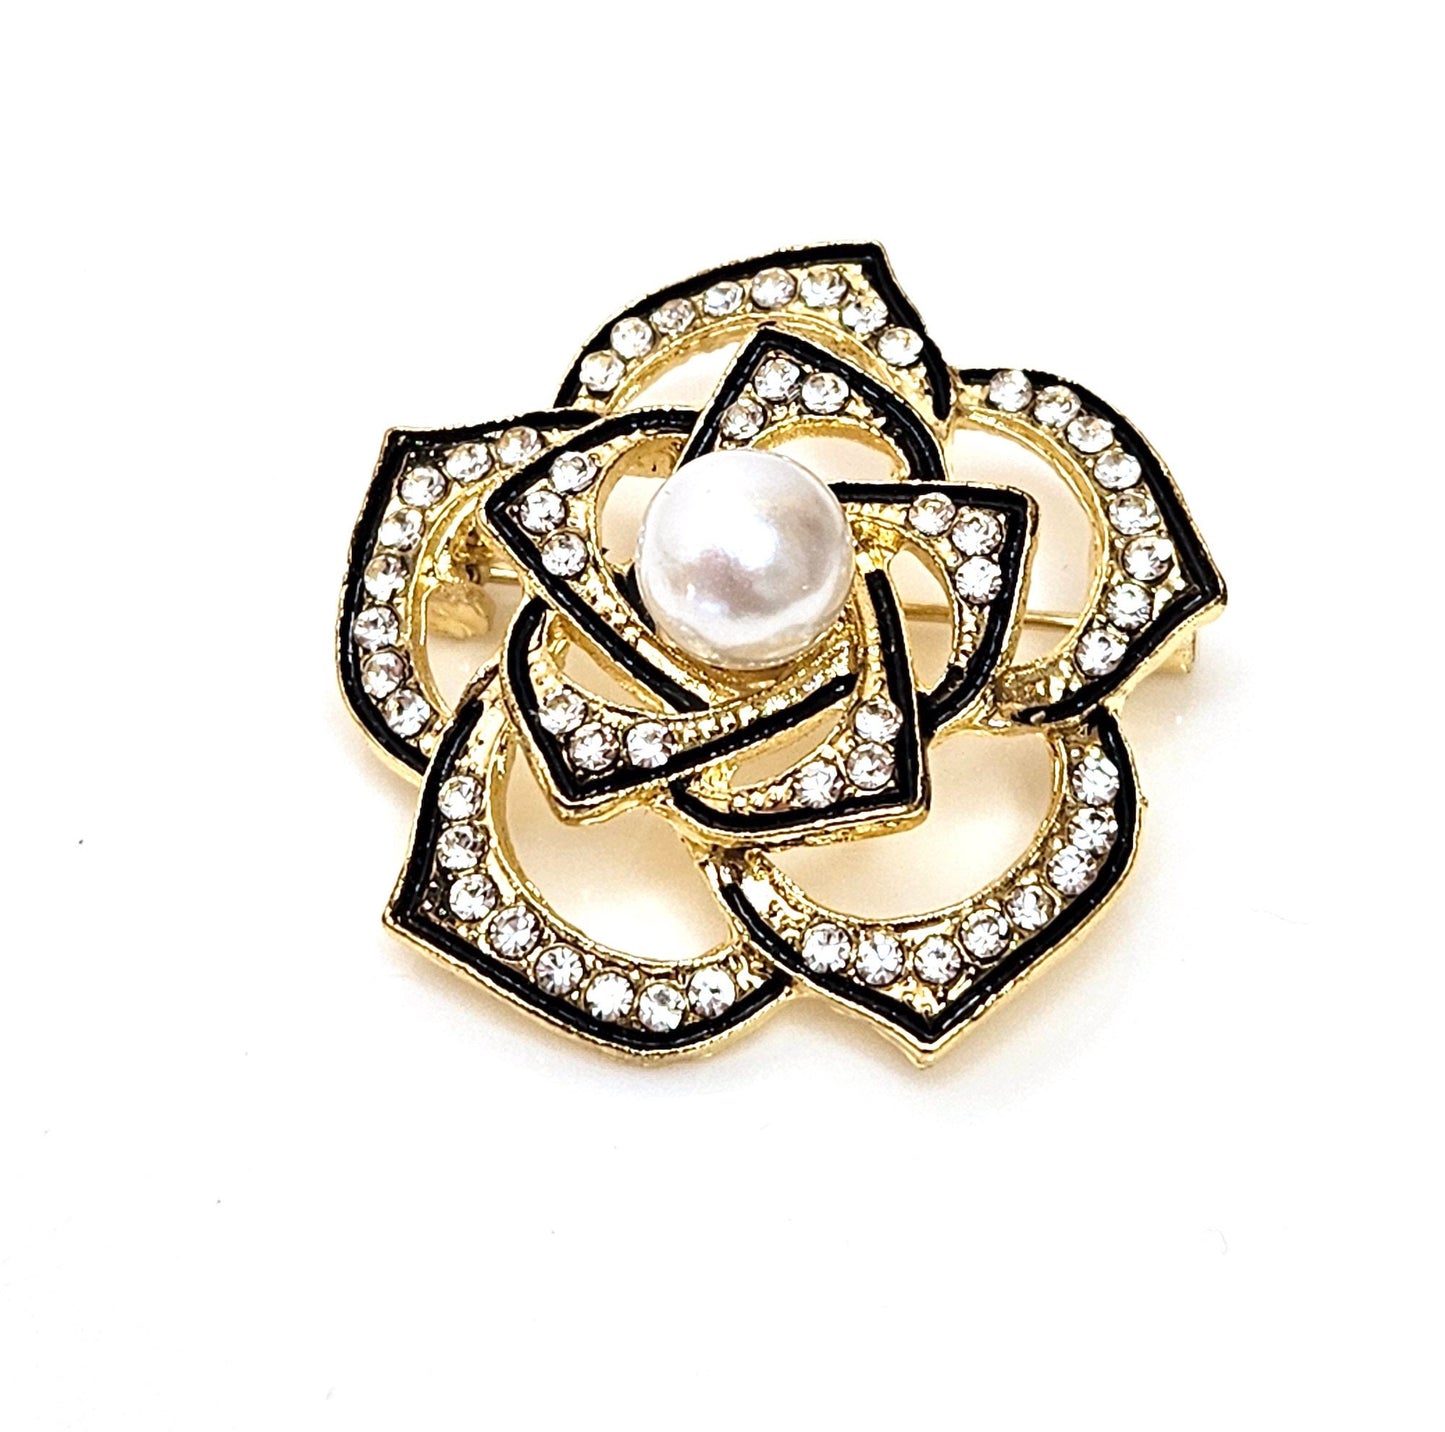 Sparkly Crystal Pearl Camelia Brooch, Crystal Flower Pin, Statement Brooch, Very Sparkly Jacket Pin, Brooches For Women